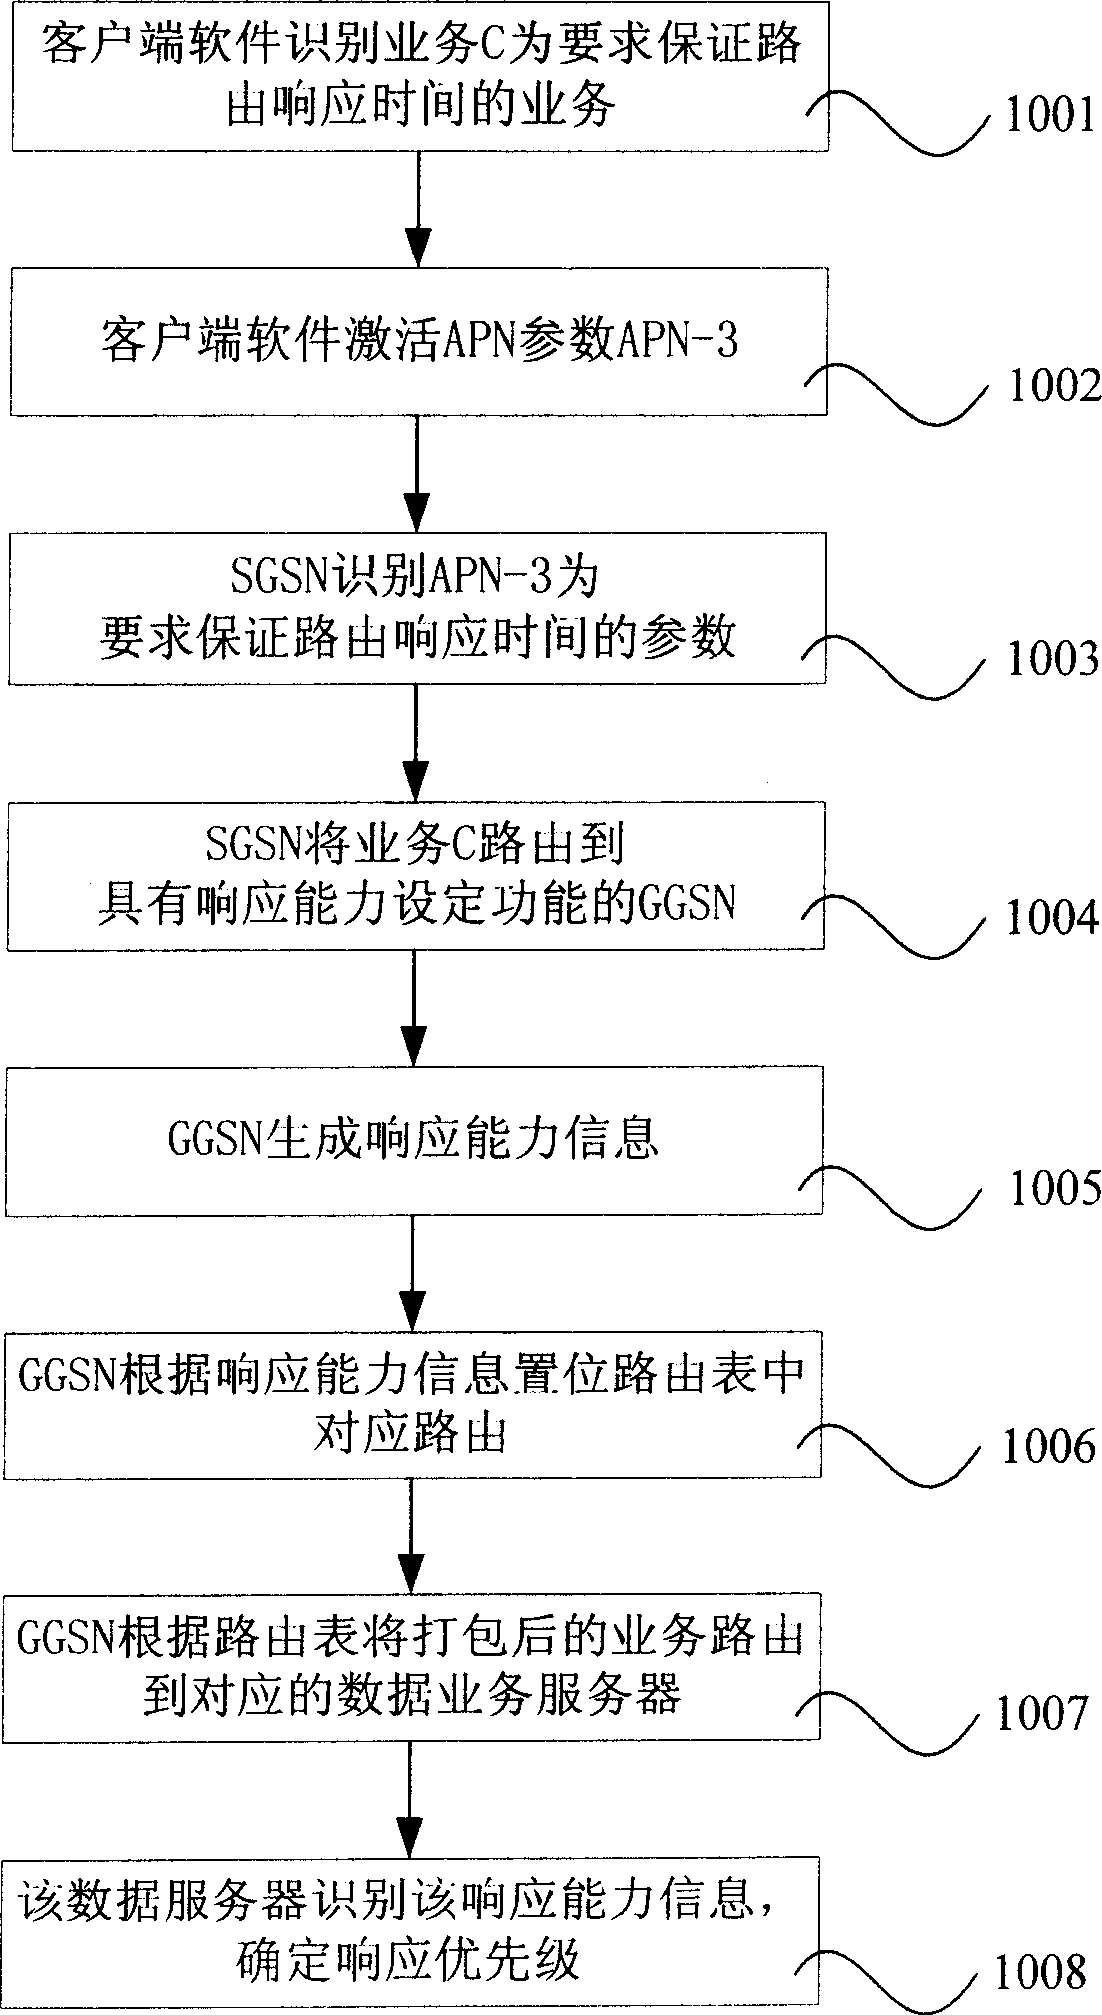 Method for realizing routing via business attribute or according to business charging type